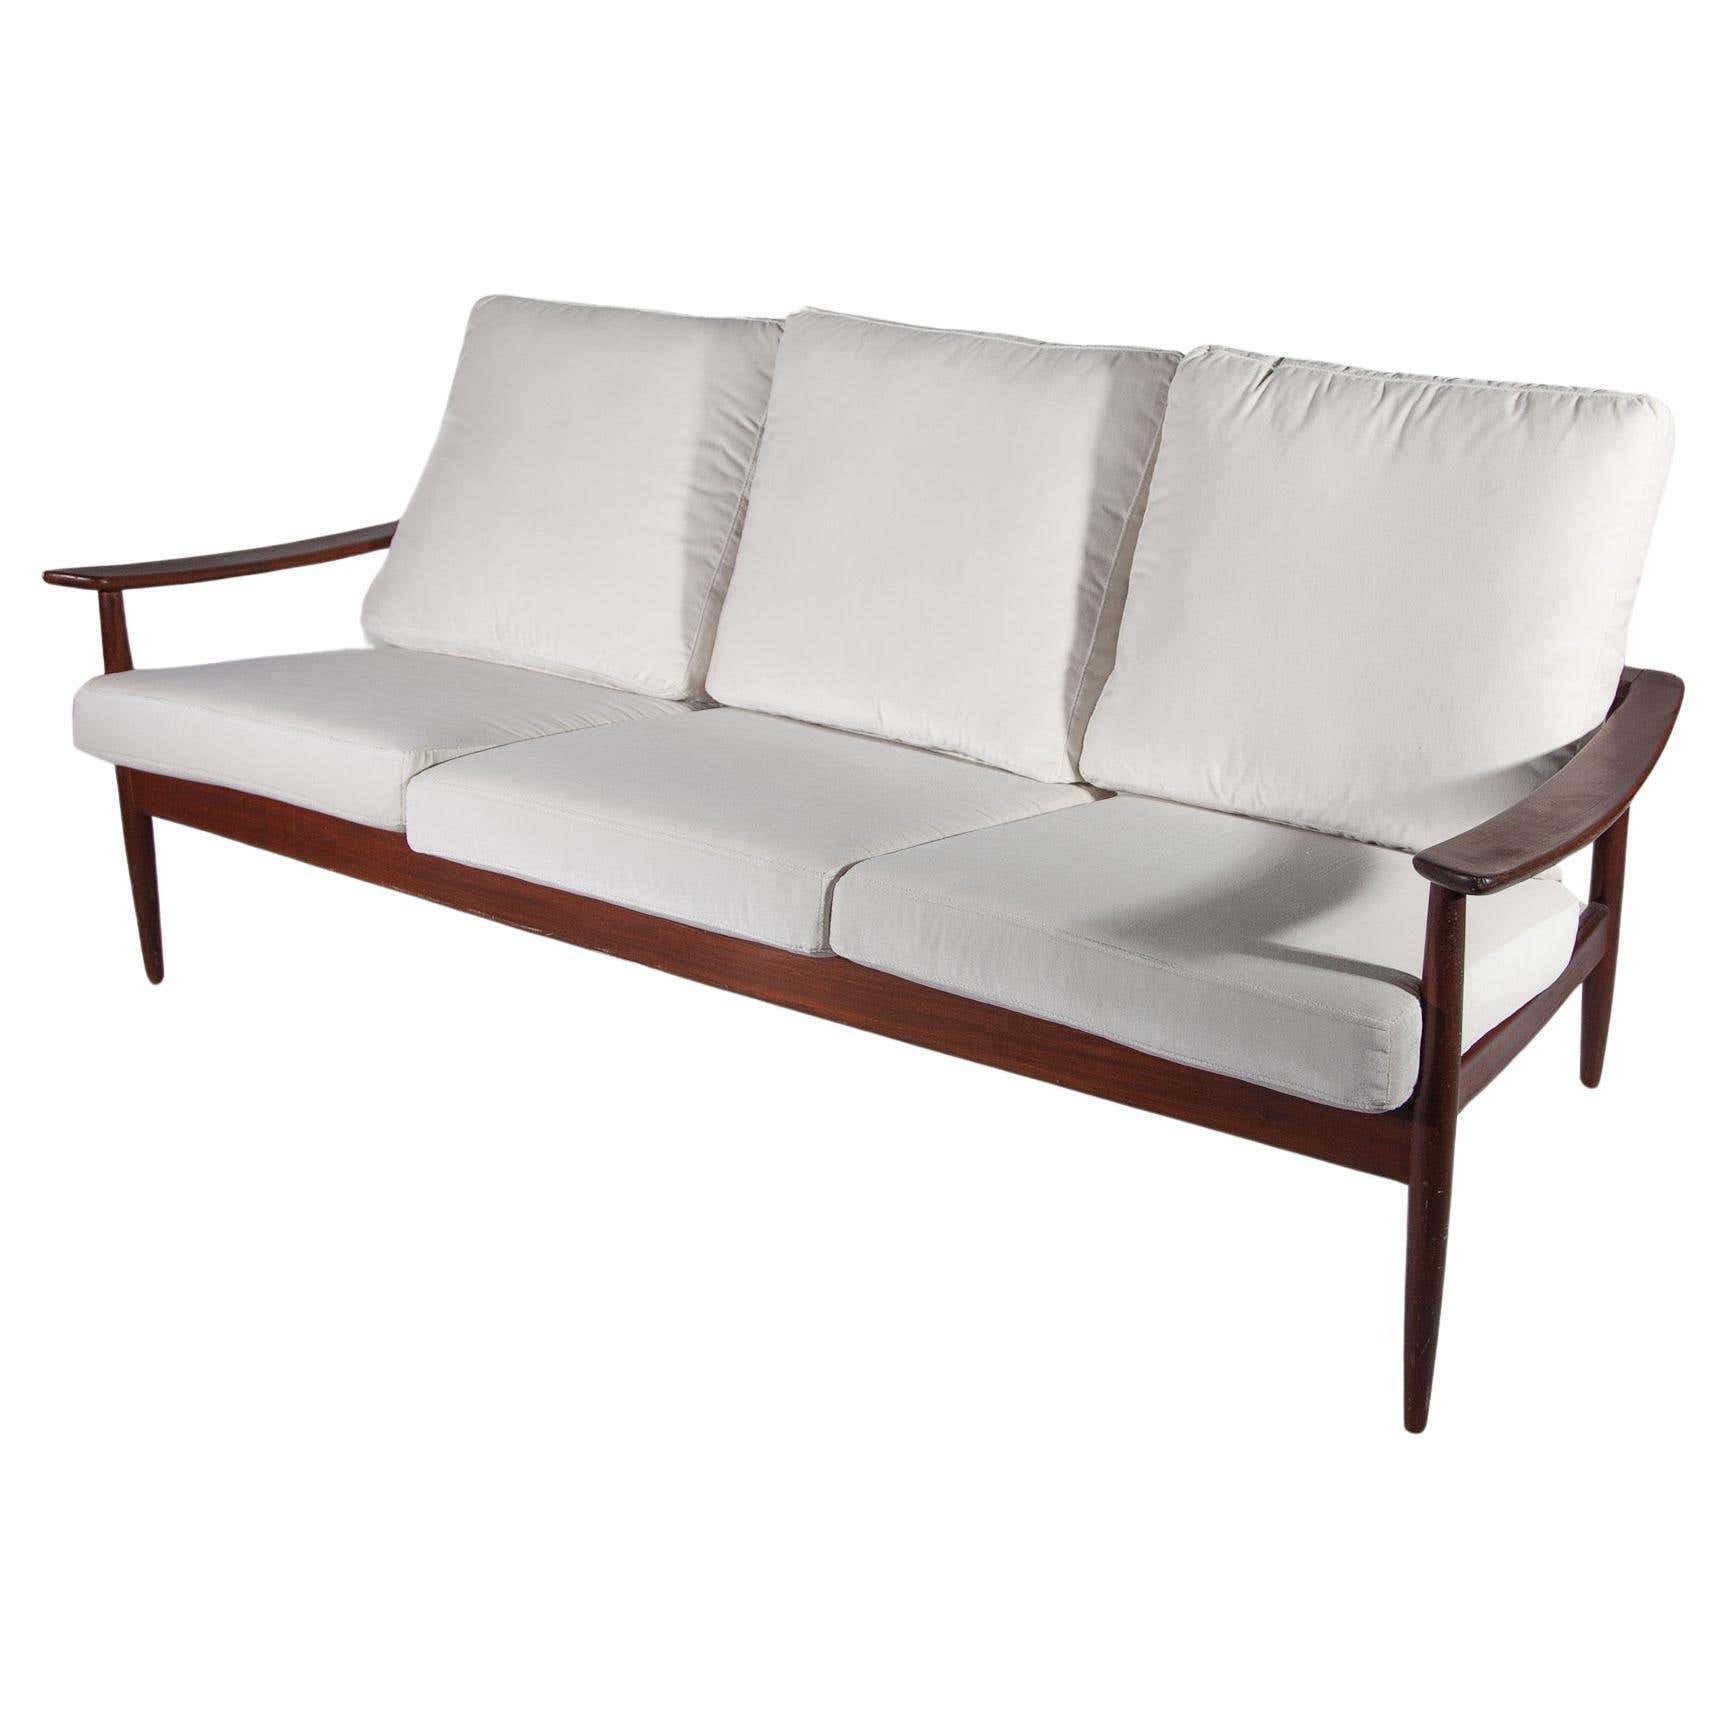 Three Seat Sofa 'U' Frame Arms and Back with Tapered Slats in Style of Ohlsson